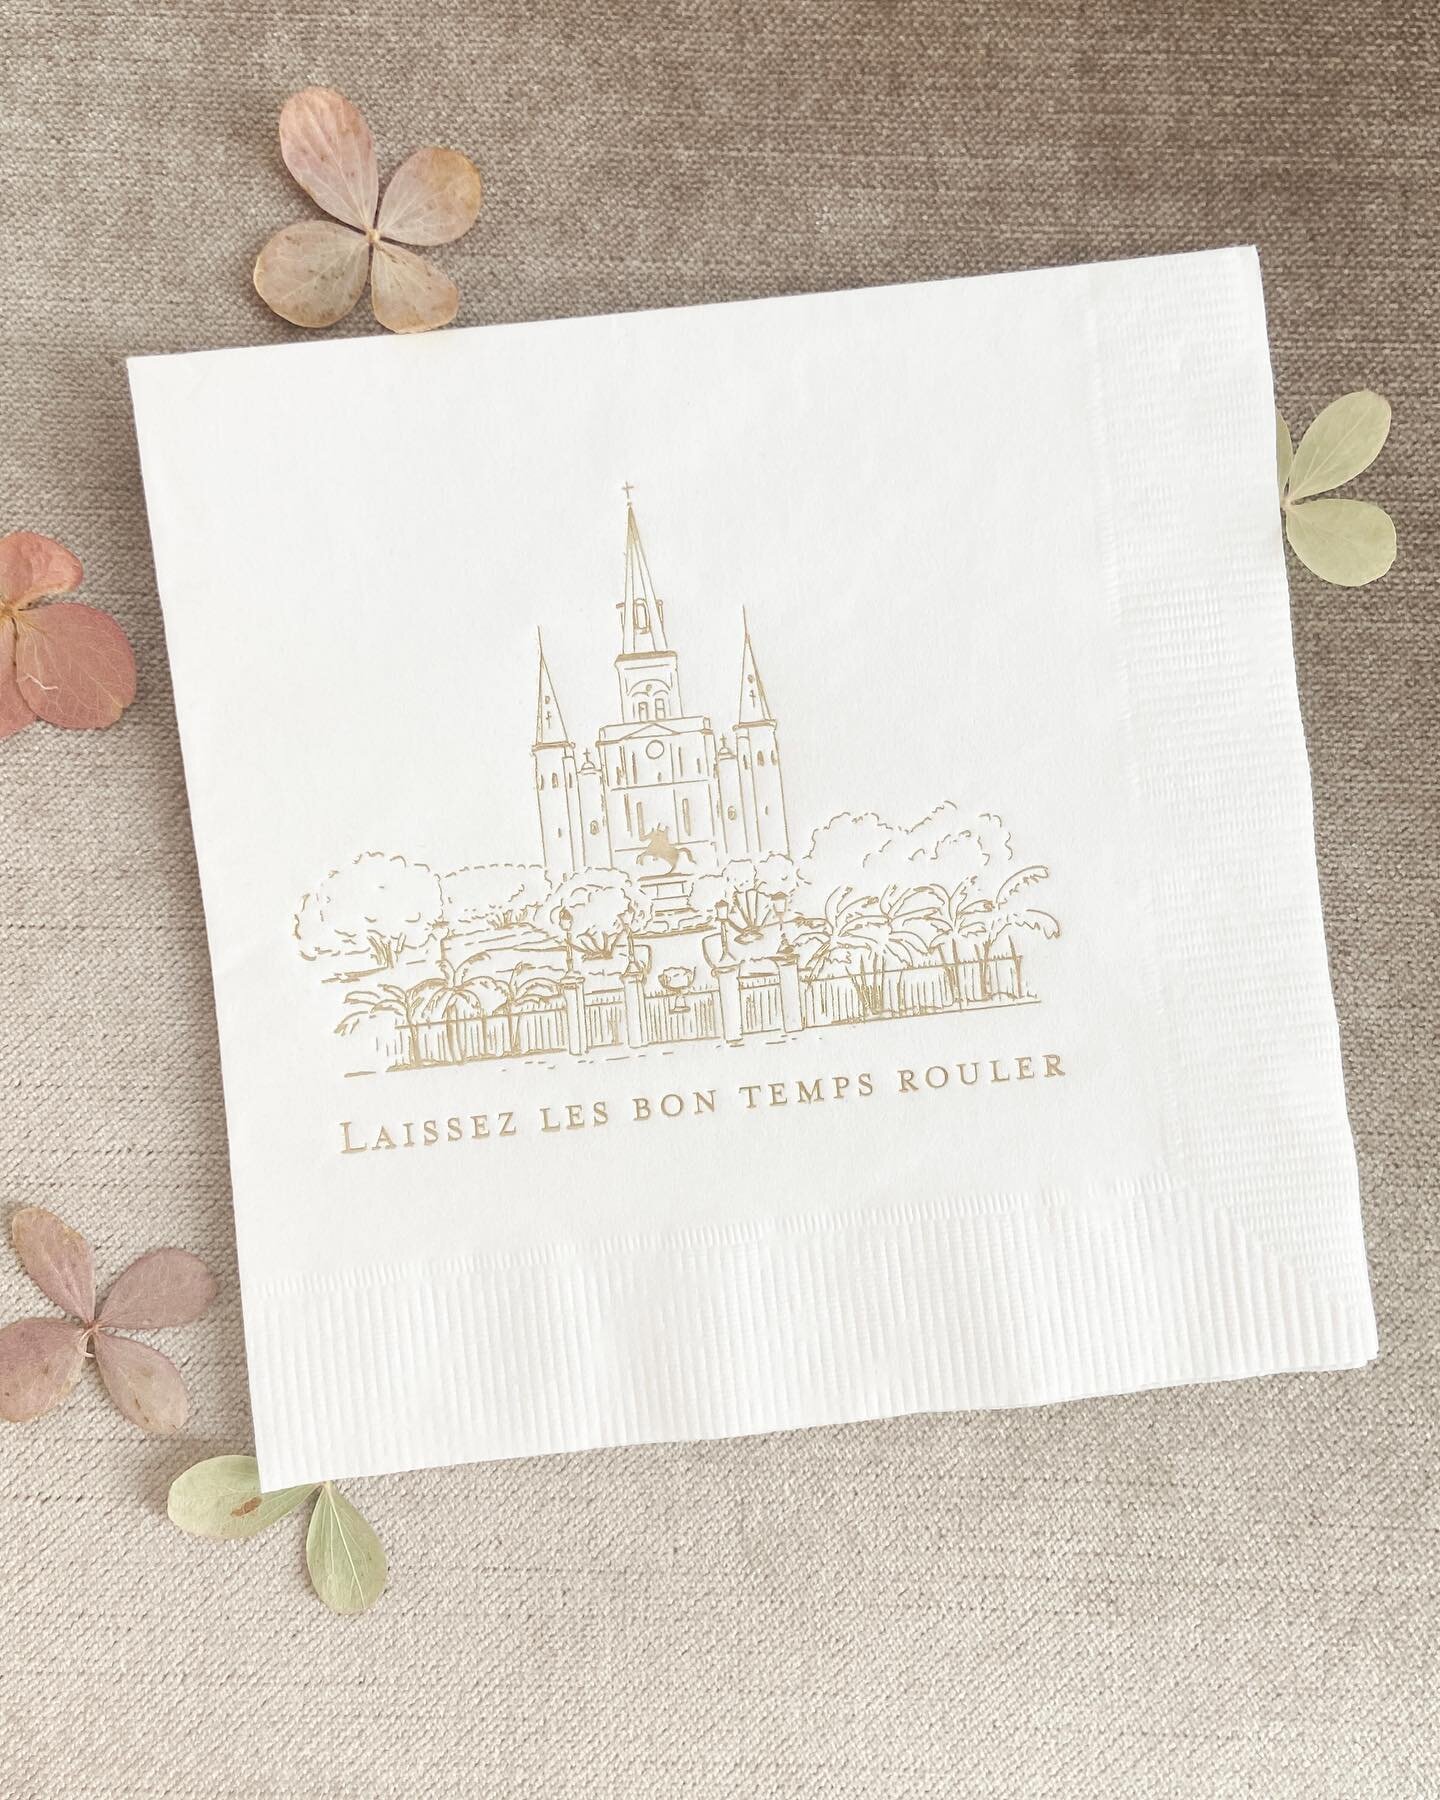 When you met in NOLA, you have to have the &ldquo;laissez les bon temps rouler!&rdquo; cocktail napkins! Love these custom welcome party cocktail napkins we designed for Lexie + Ian, they were such a personal touch! ✨
Planning @kristinashleyevents 
.